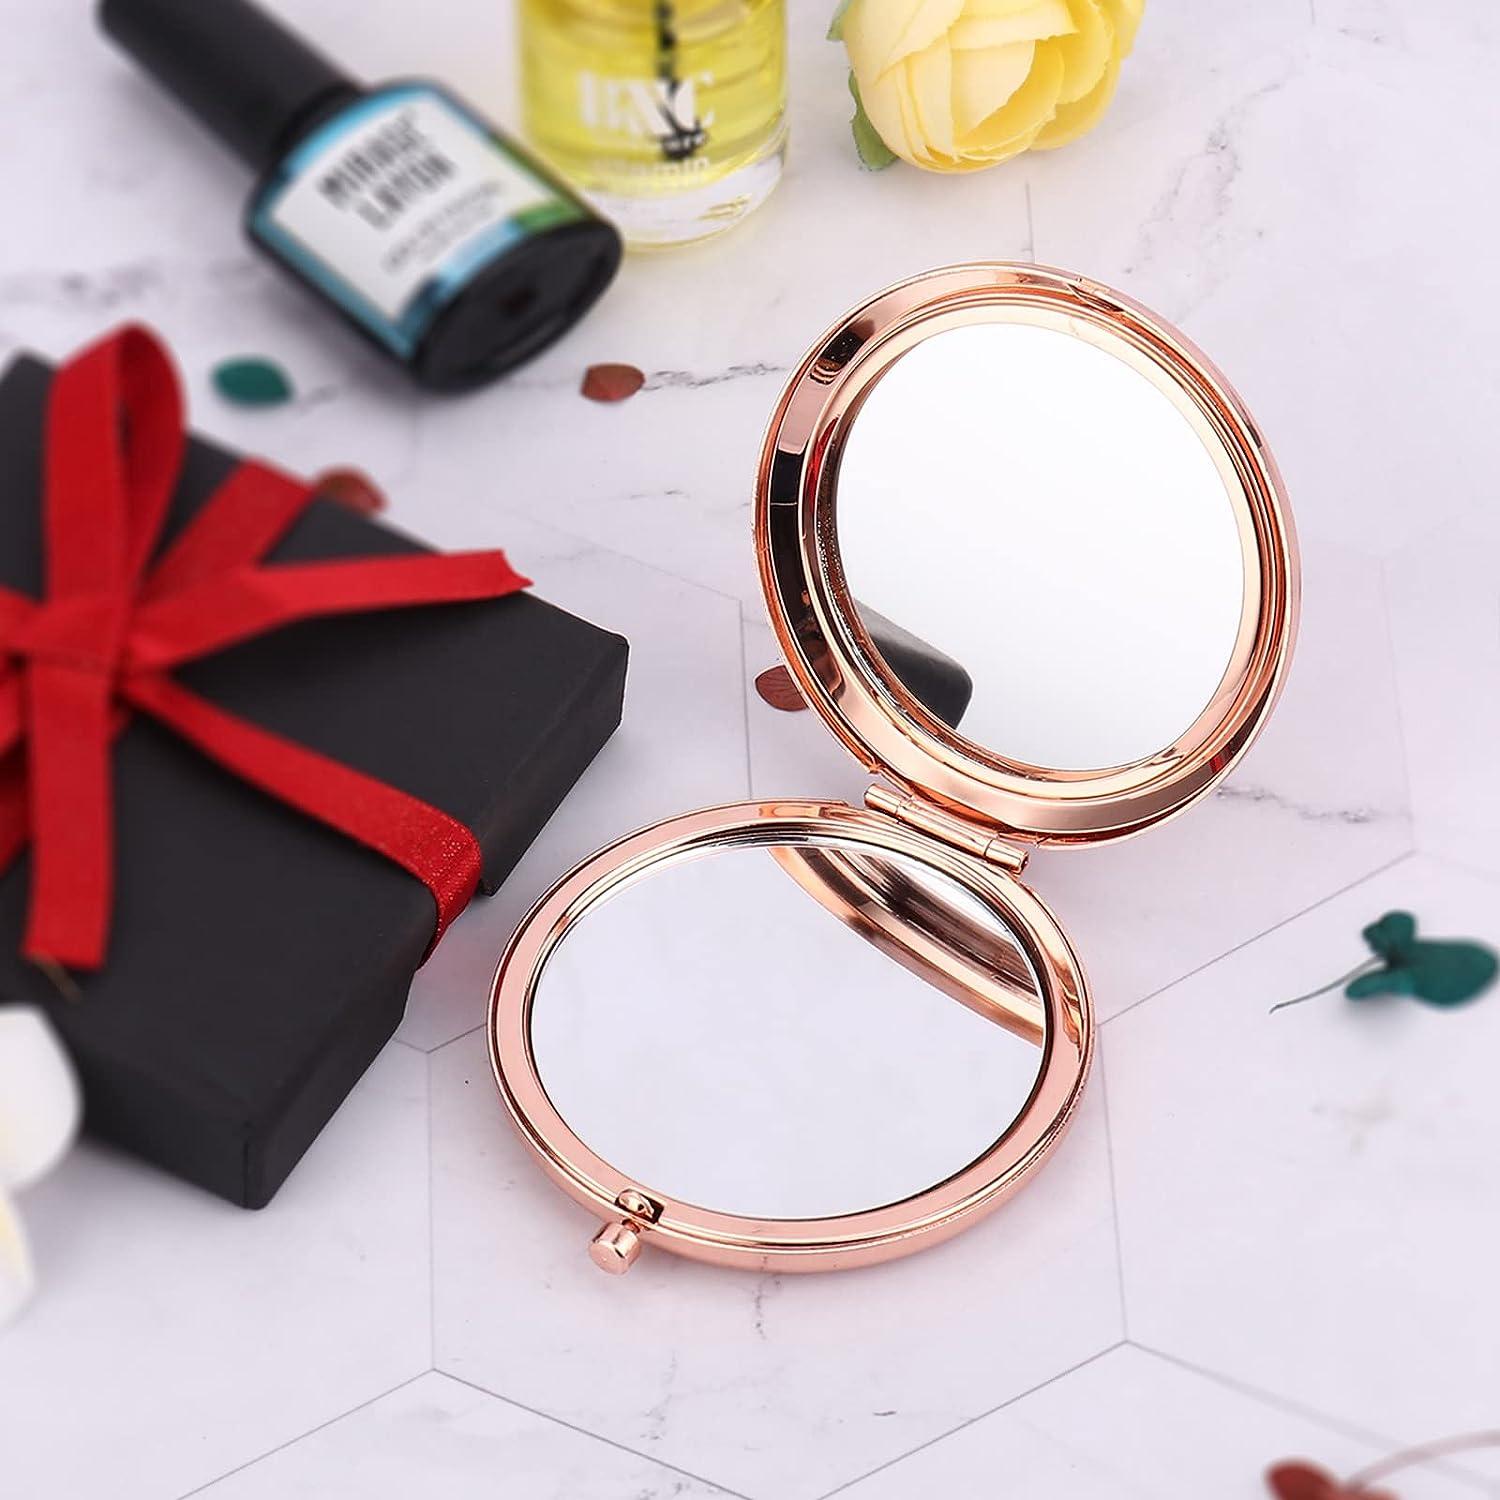 Gifts for Mom from Daughter Son Mothers Day Birthday Gifts for Mom- I Love  You Mom Rose Gold Compact Mirror Unique Mom Gifts for Mother Stepmom Women  Mothers Day Christmas Valentines Day